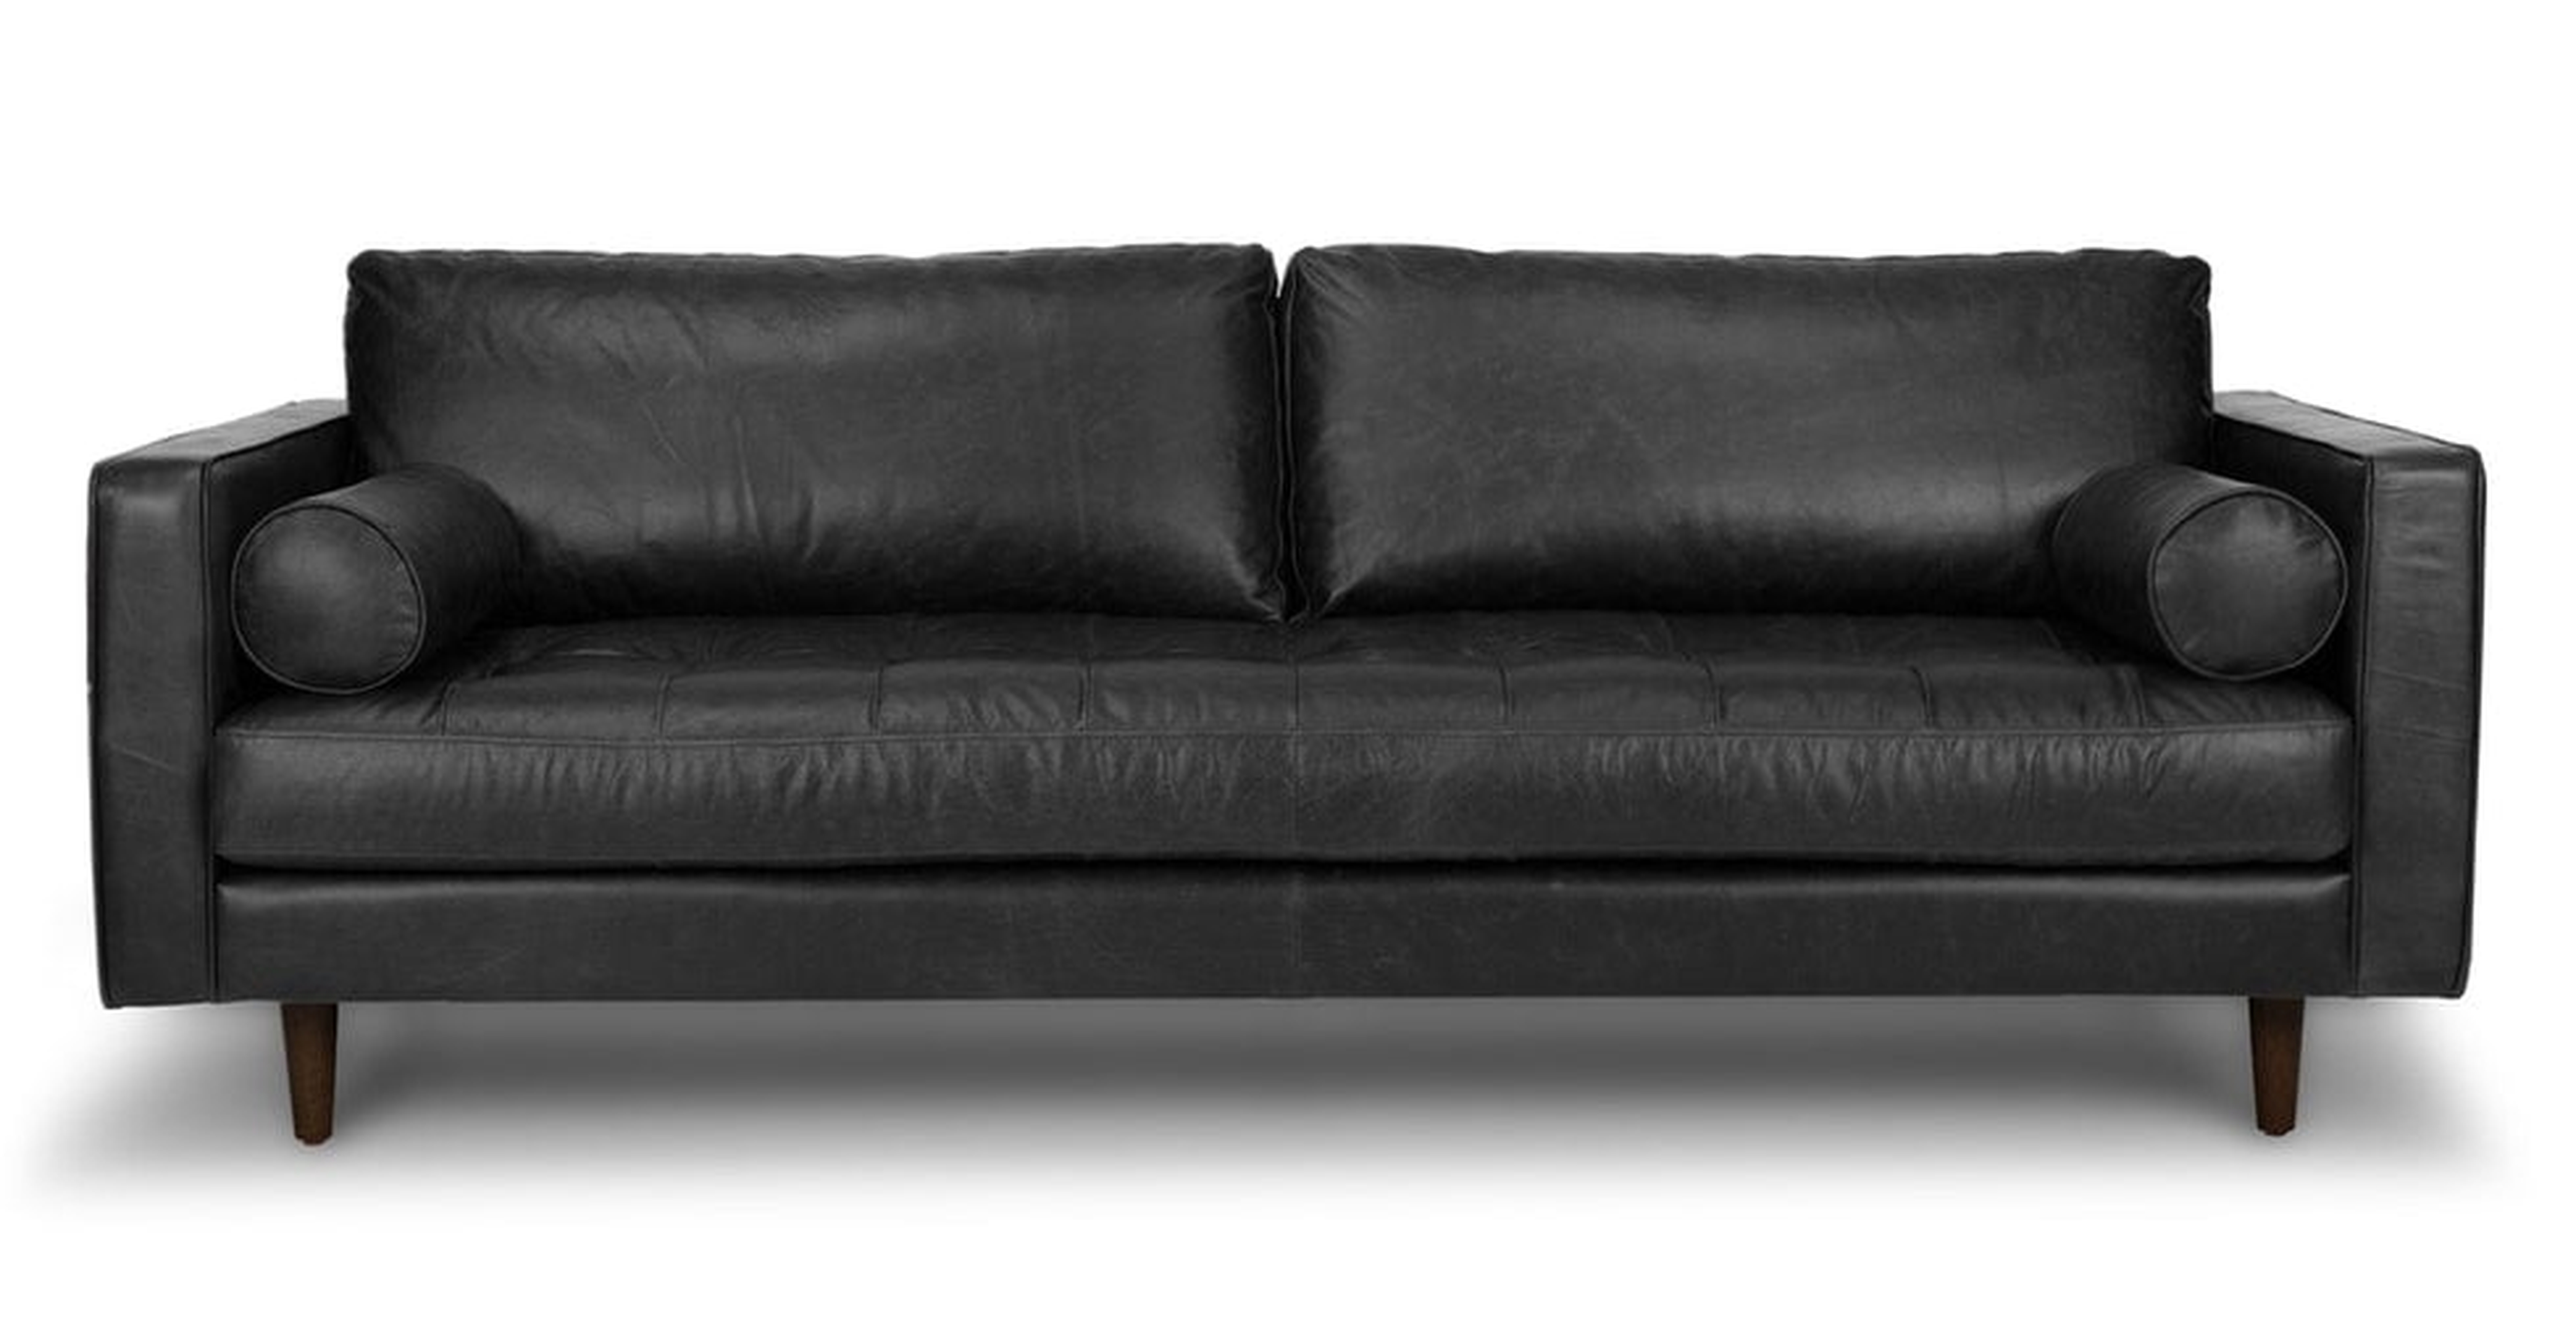 Sven 88" Tufted Leather Sofa - Oxford Black - Article